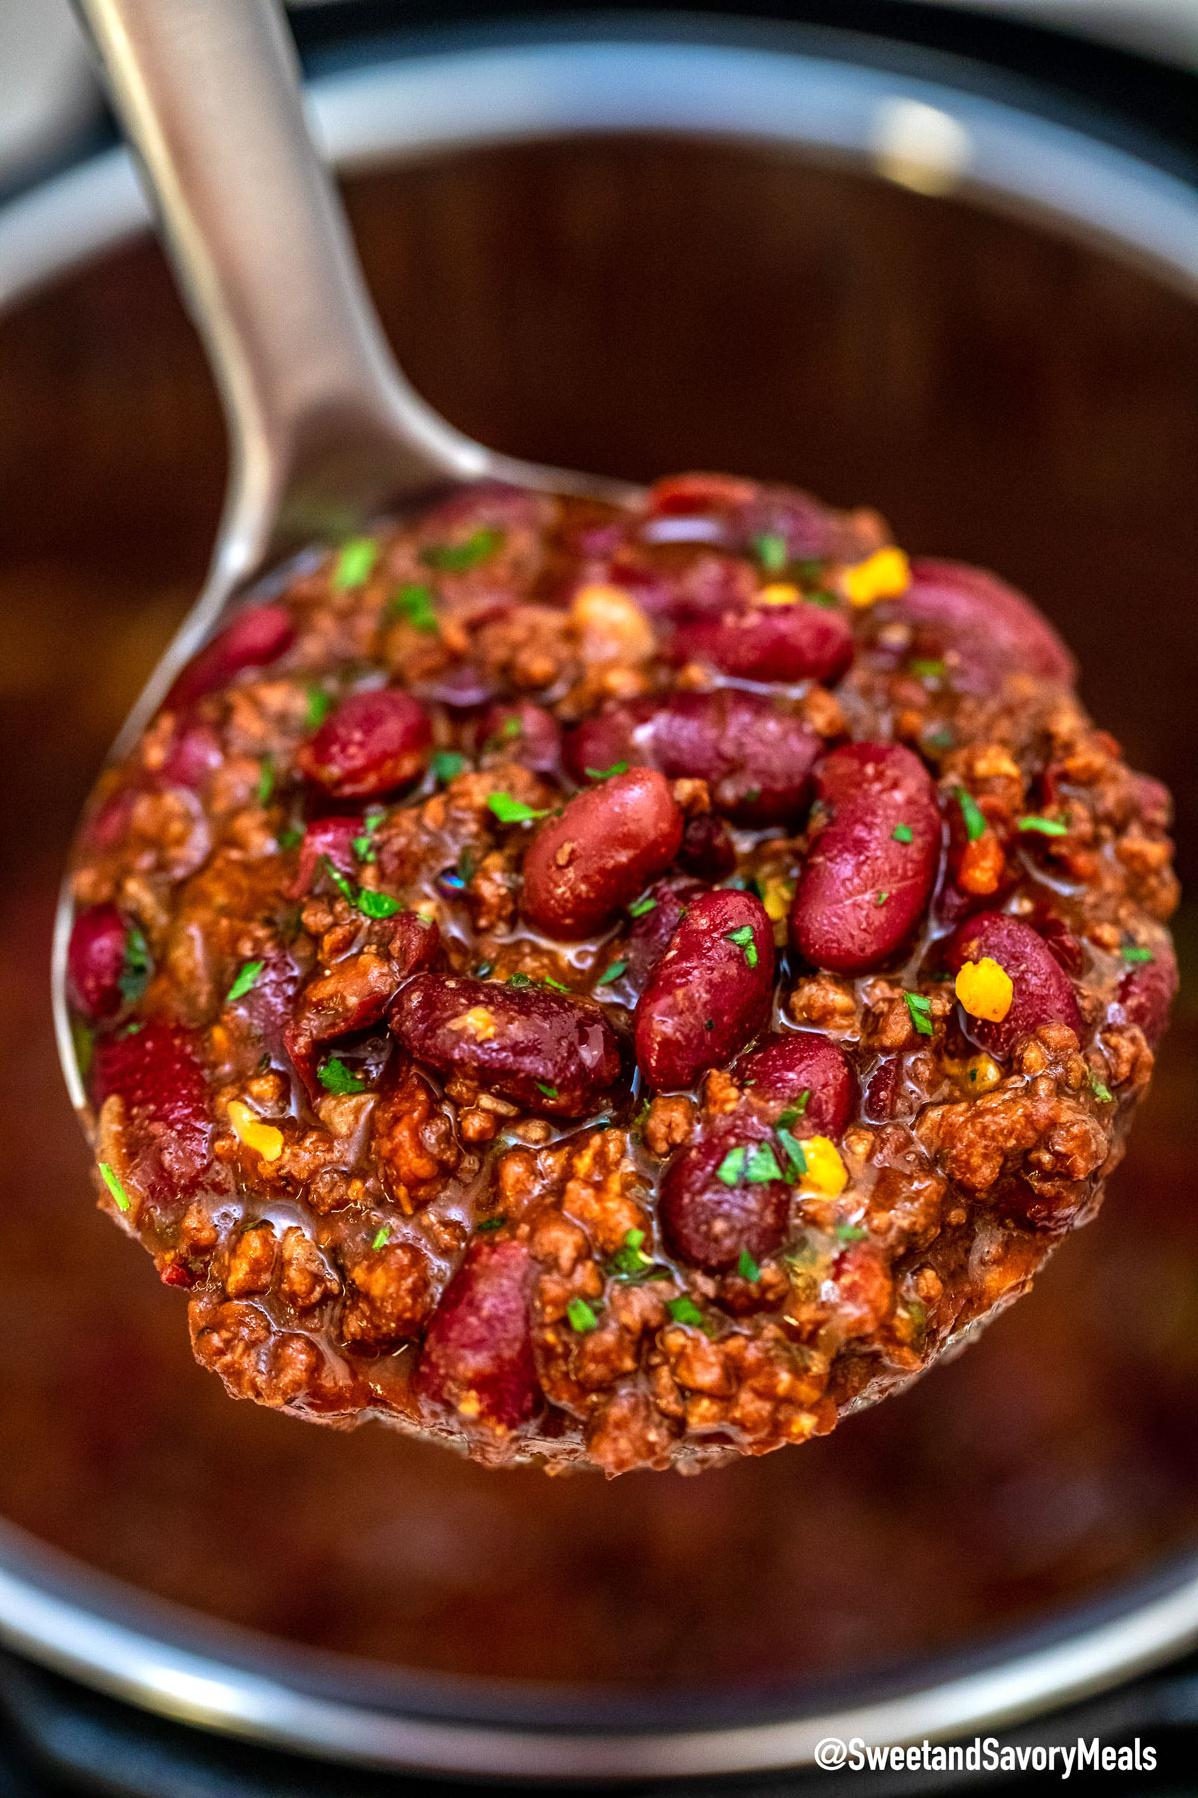  Impress your friends and family with this homemade chili